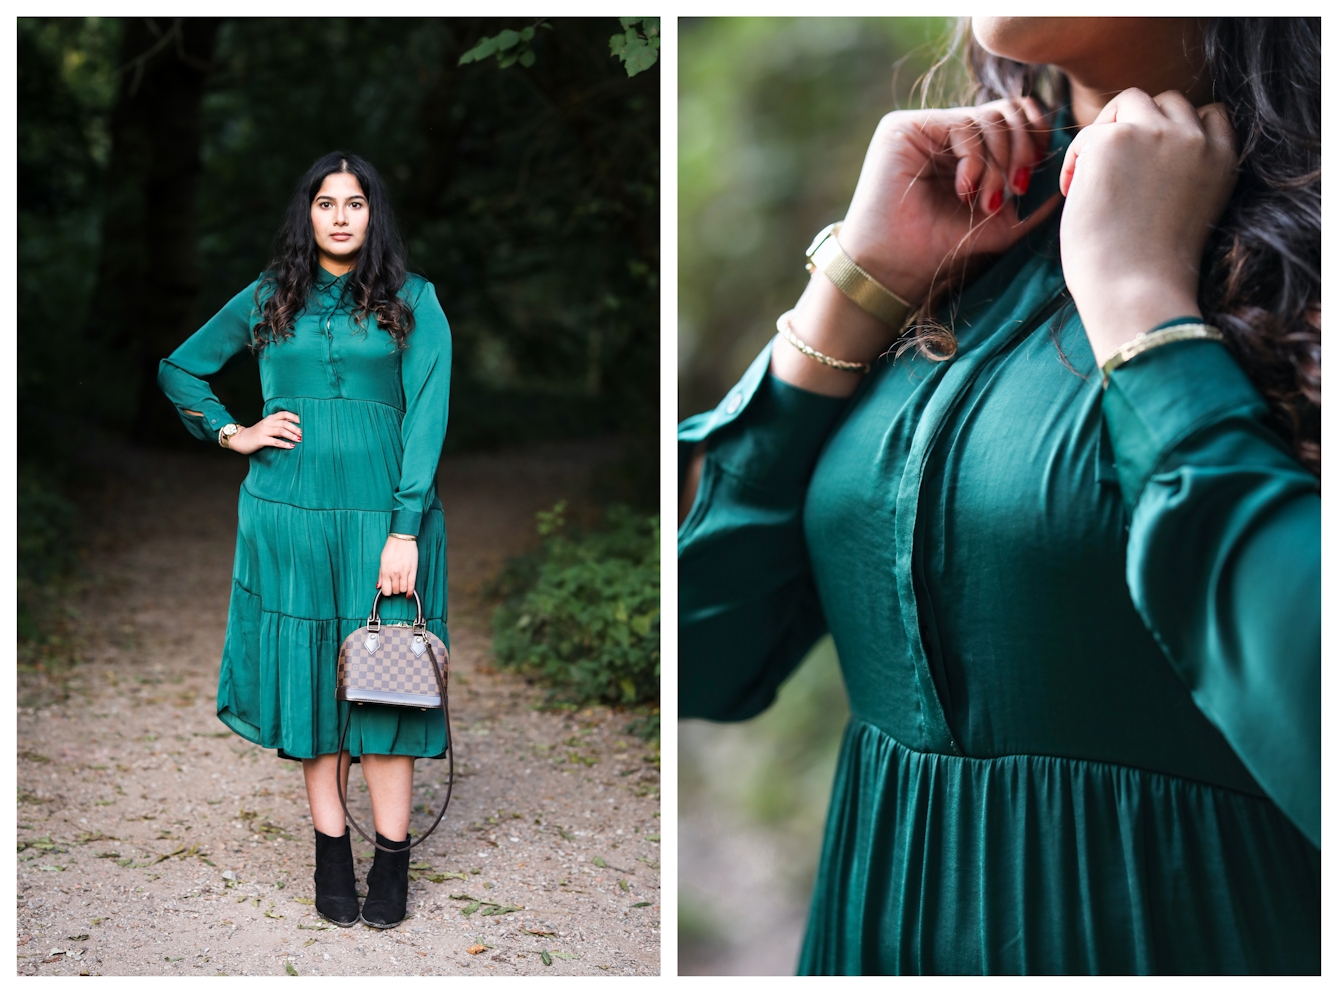 Photographic diptych. The image on the left shows a full length view of a woman who is wearing an emerald green dress with a shiny lustre. She is standing looking straight at the camera, with her right hand on her hip and in her left hand she is holding a small hand bag in front of her left leg. In the background can be seen a dark park or woodland scene with a footpath disappearing into the distance. On either side of the path is green vegetation and tree leaves. The image on the right shows a close-up of the same woman in the same dress, concentrating on her torso which is slightly angled to the camera. Her hands are both up at her collar where she seems to be making an adjustment to the dress.